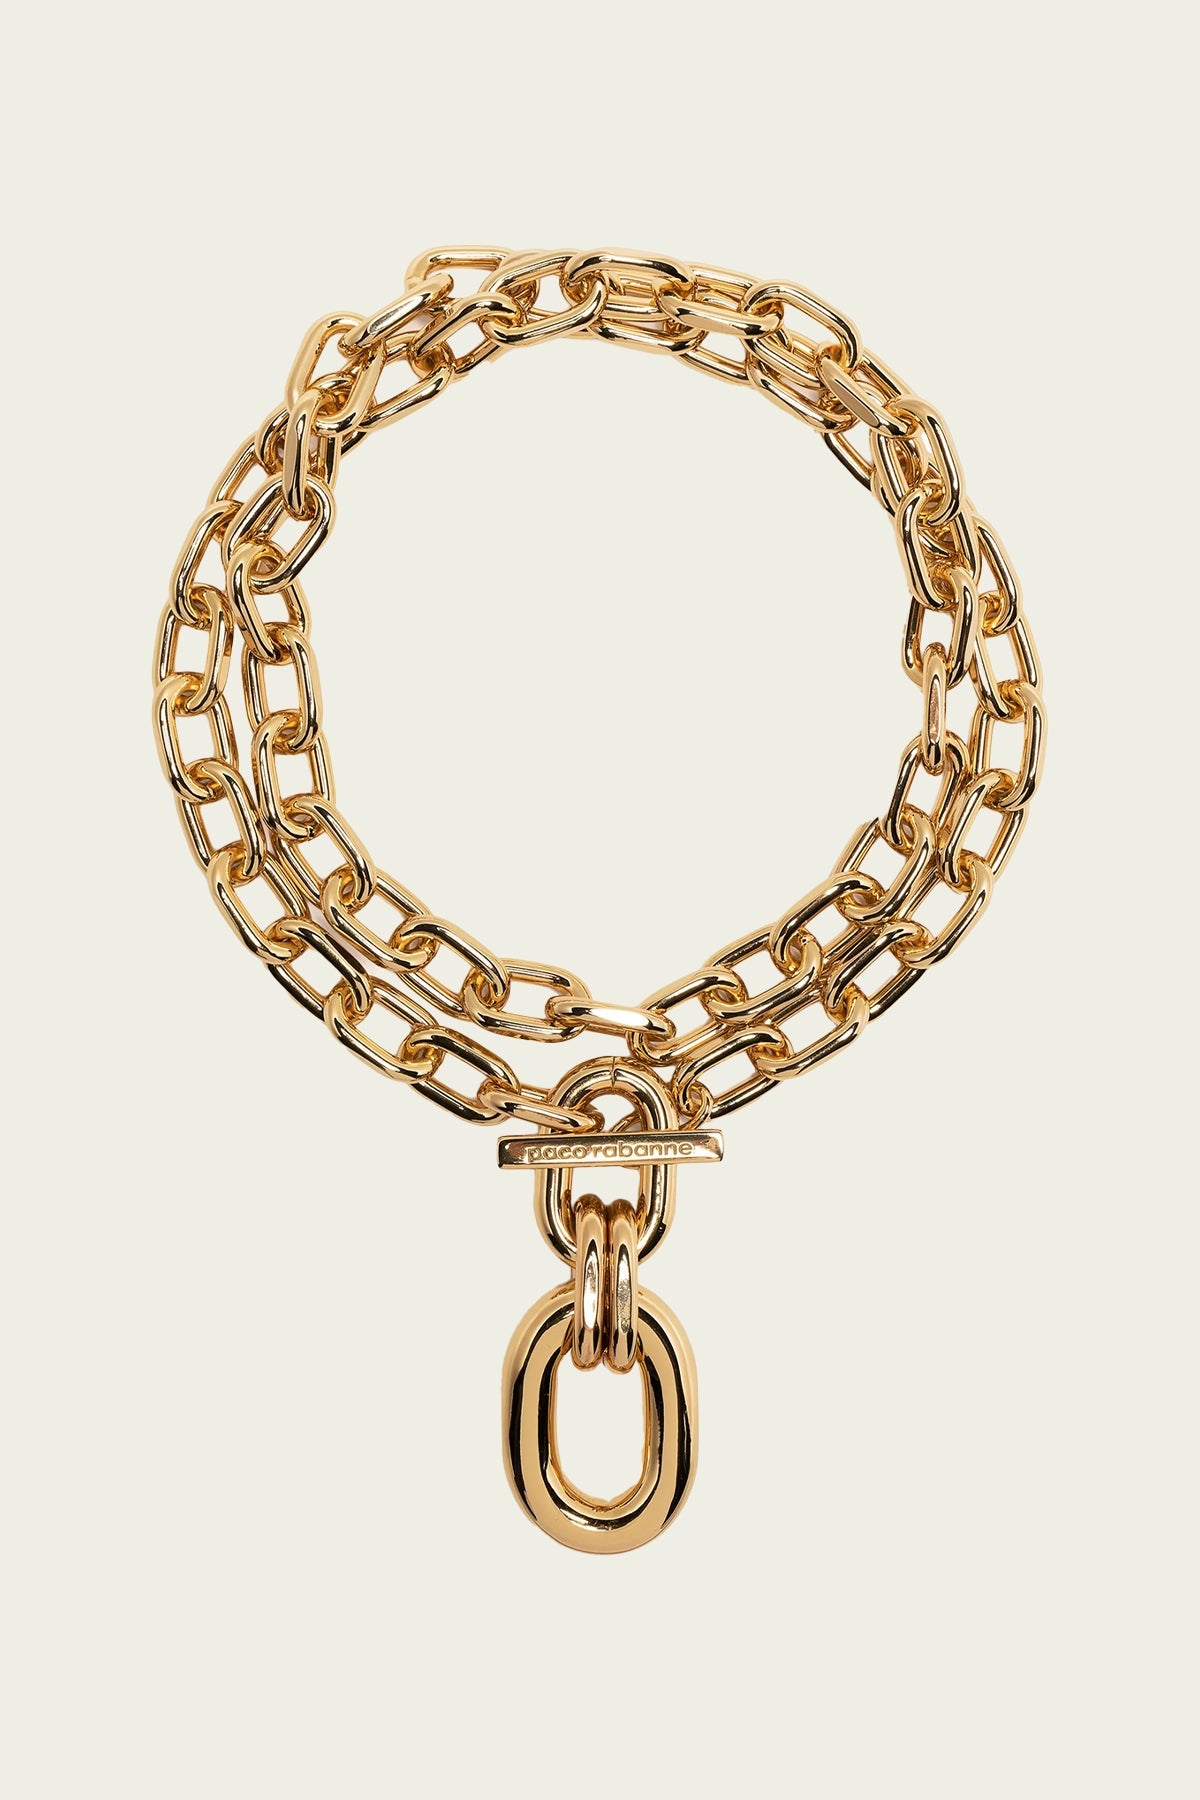 Double-Wrap Chain Necklace in Gold - shop-olivia.com